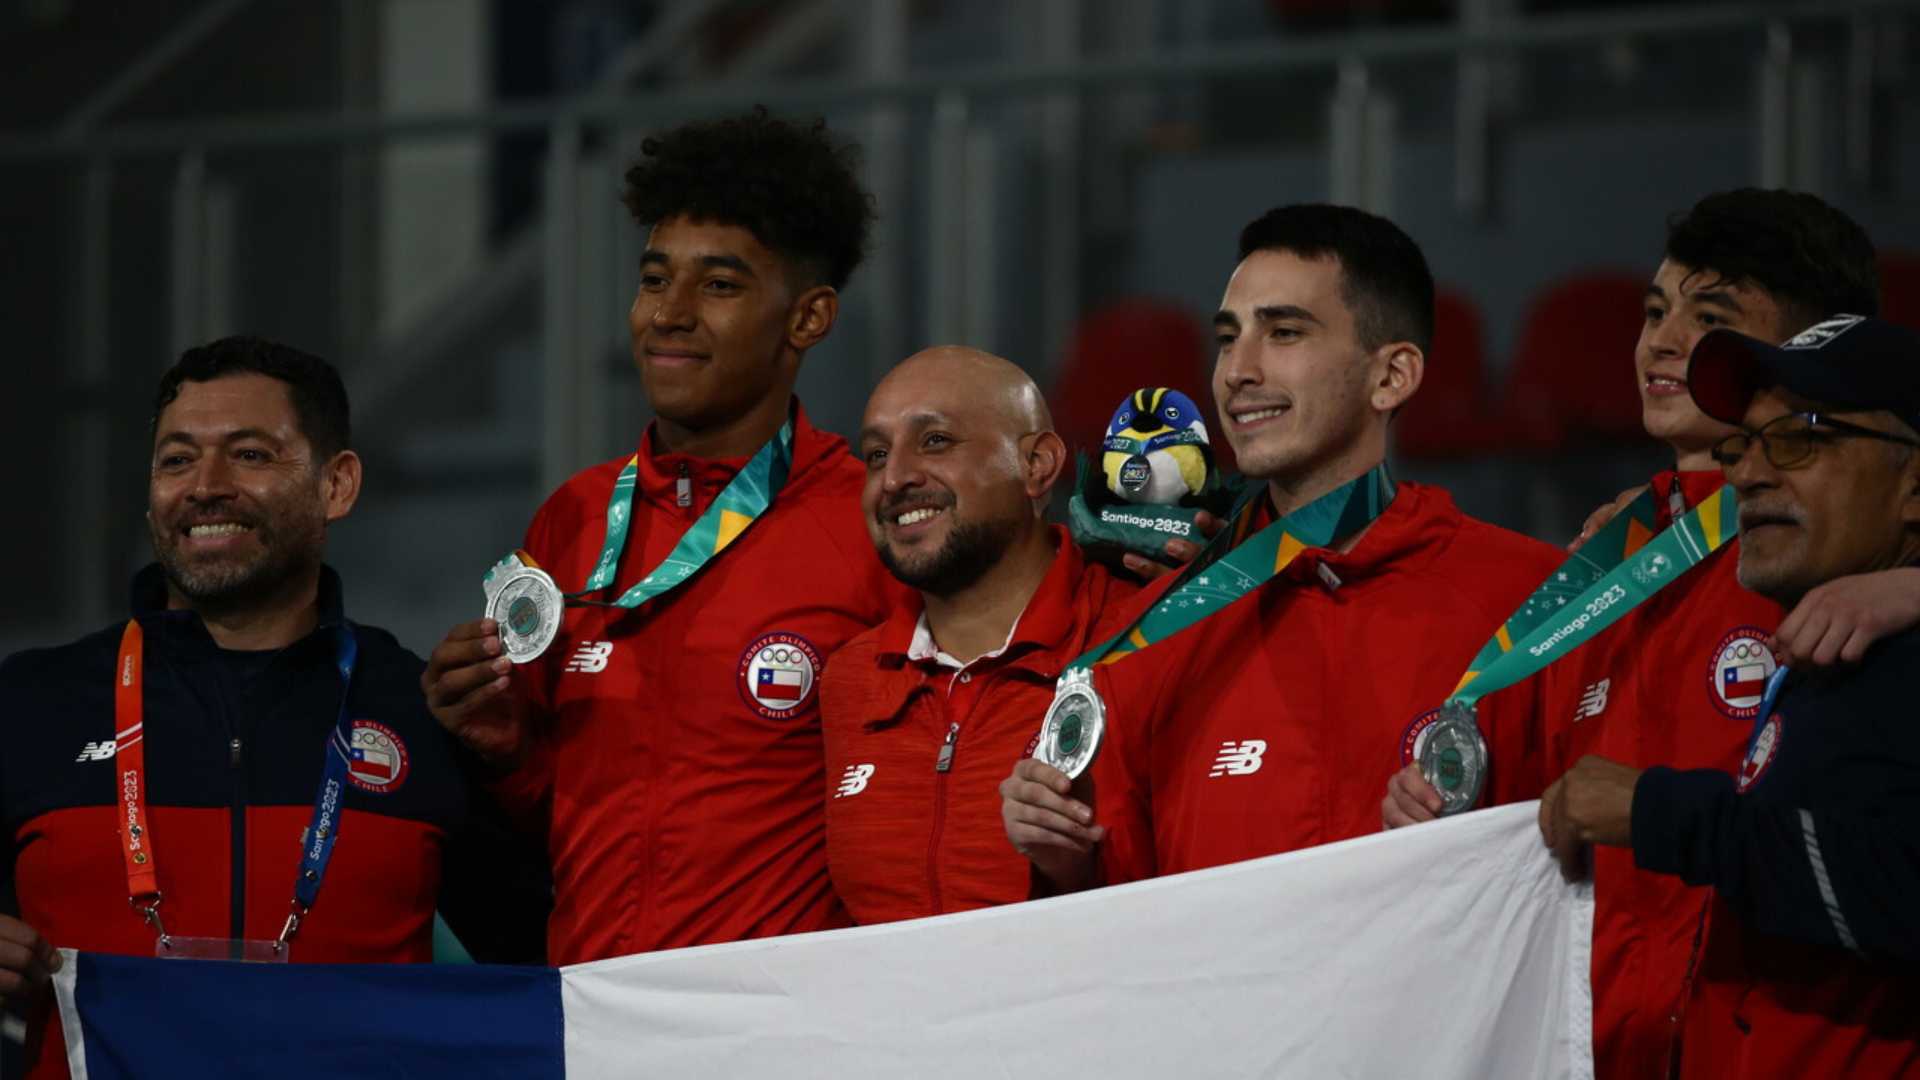 Summary: The day with most gold medals for Chile